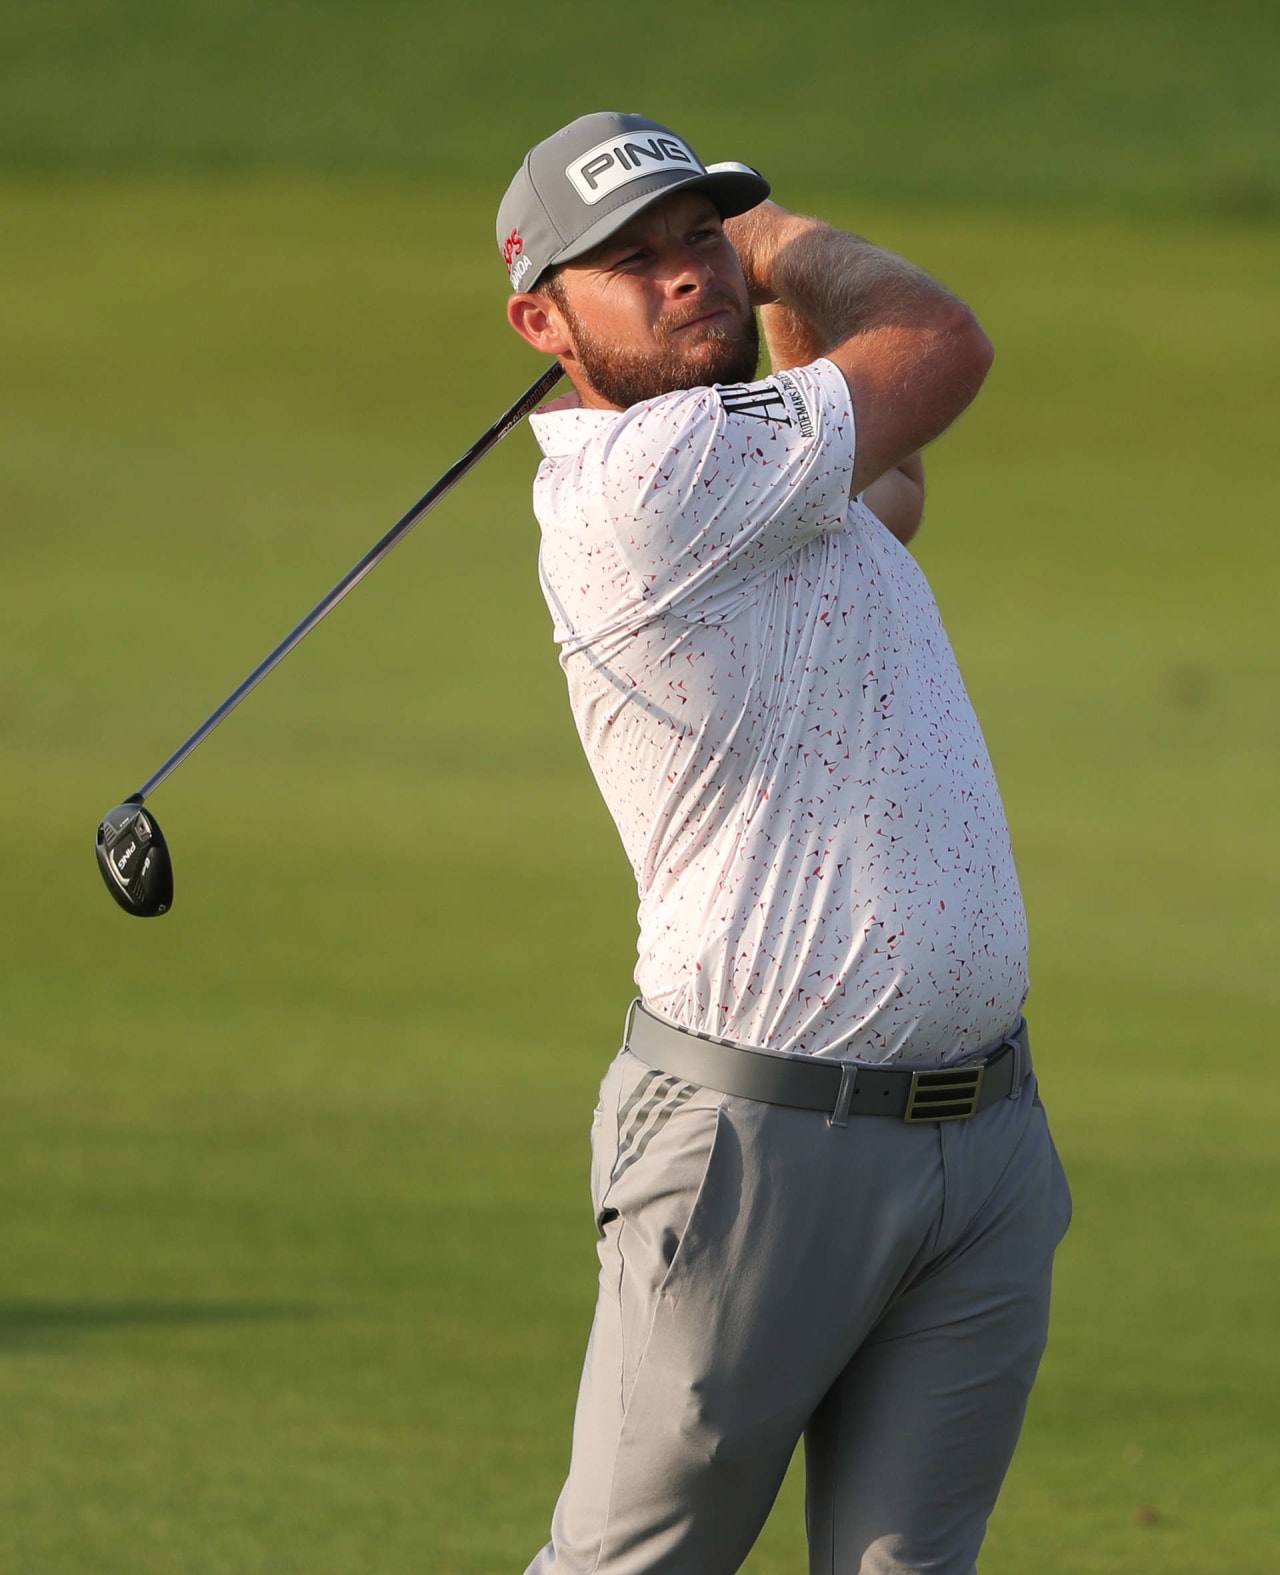 AL MUROOJ, SAUDI ARABIA - FEBRUARY 03: Tyrrell Hatton of England plays his second shot on the 18th hole during day one of the PIF Saudi International at Royal Greens Golf & Country Club on February 03, 2022 in Al Murooj, Saudi Arabia. (Photo by Oisin Keniry/Getty Images)